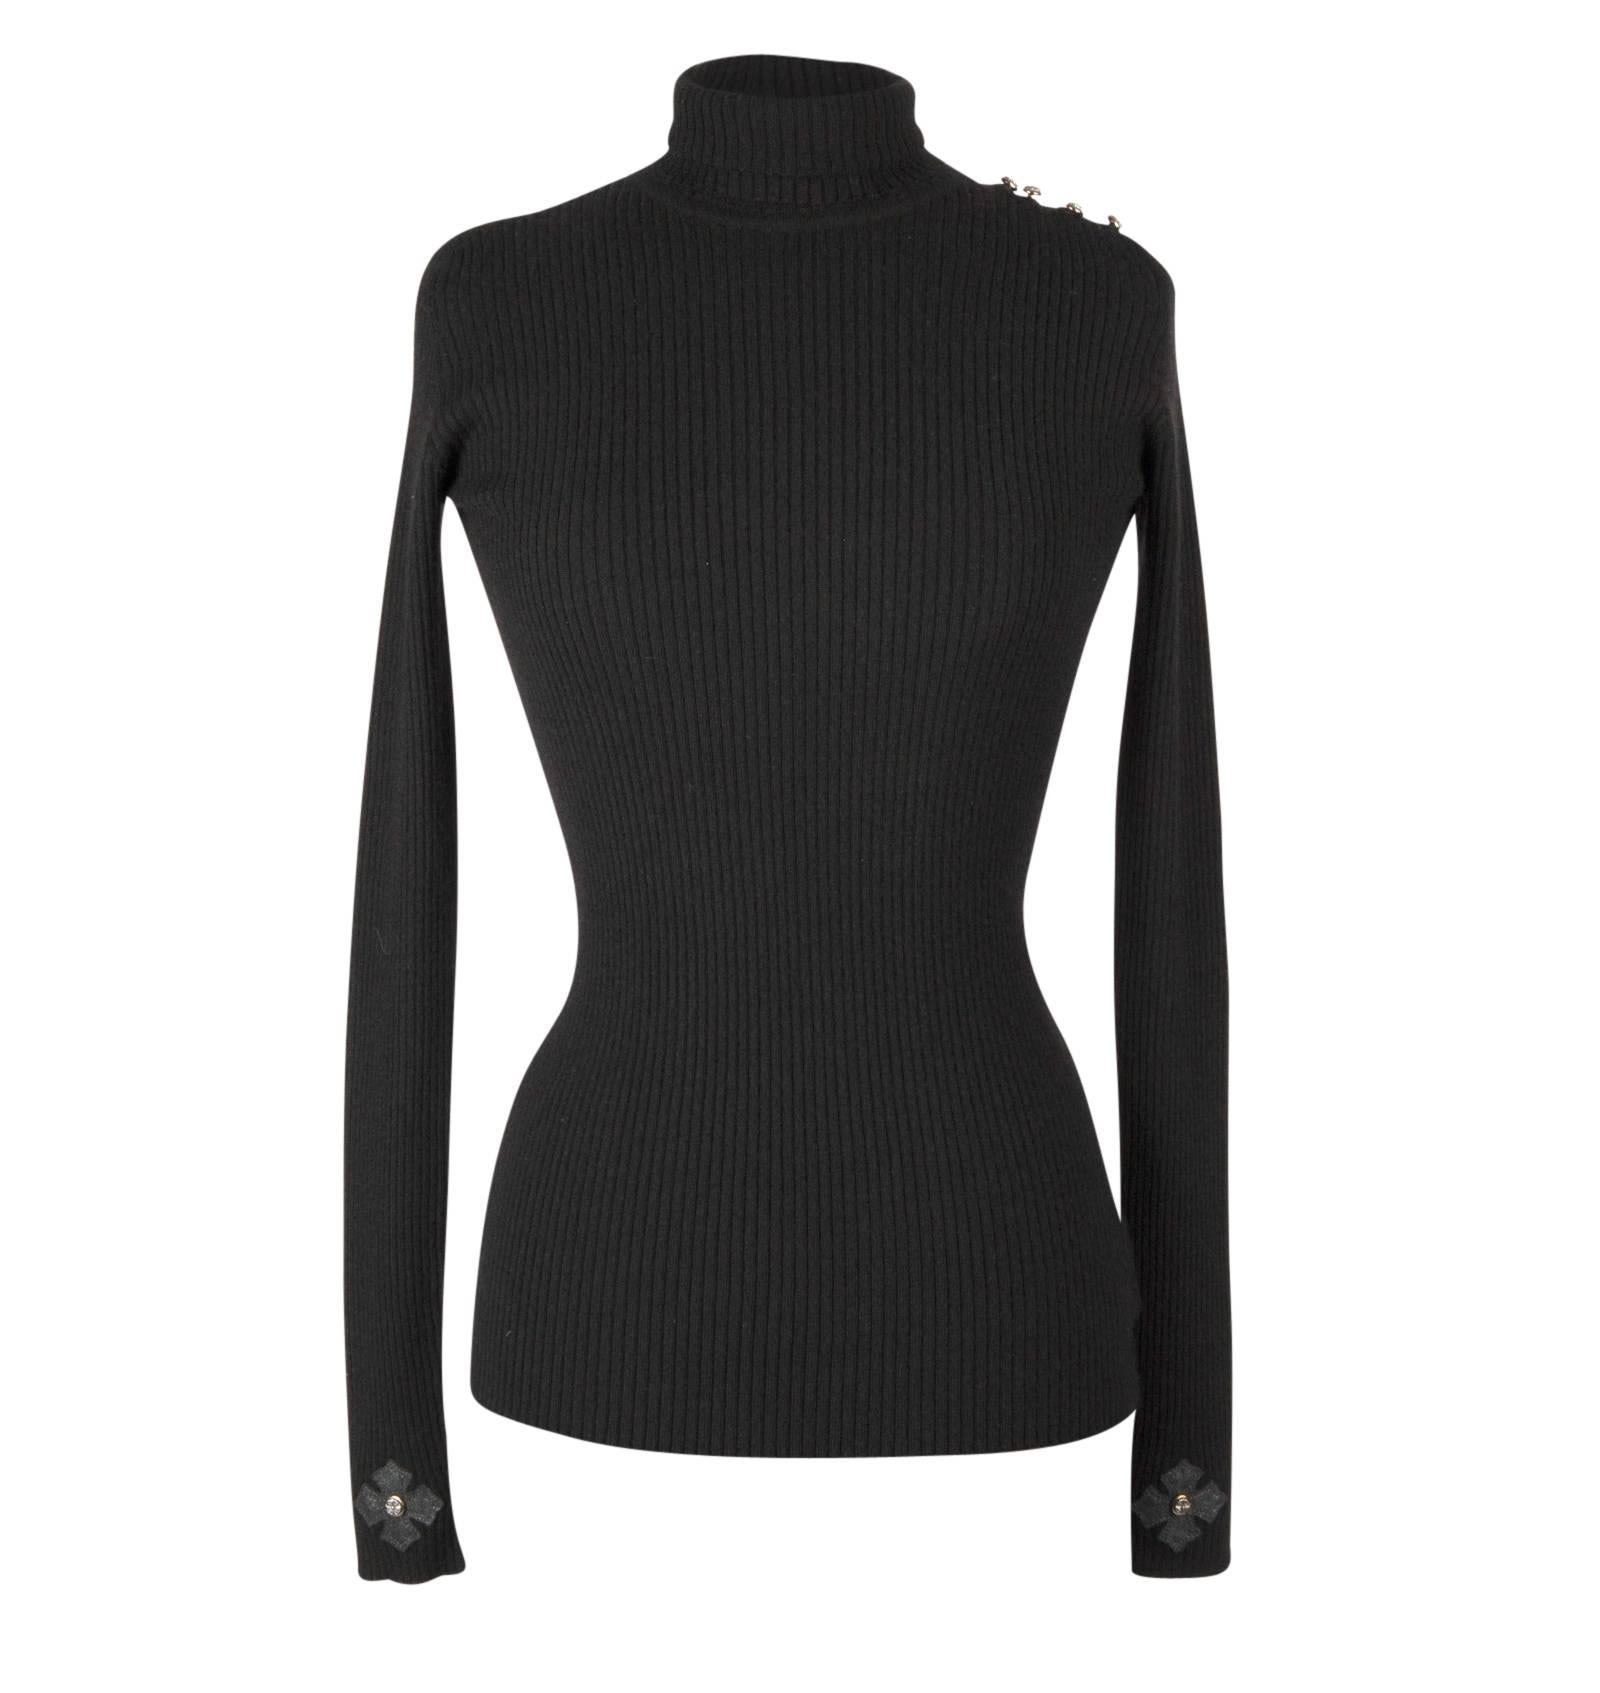 Guaranteed authentic Chrome Hearts Black very soft and light Cashmere turtleneck.   
Signature leather cross and sterling silver filigreed stud at cuffs. 
One shoulder has 5 sterling silver buttons with leather loops.
Fitted, sleek, timeless.
final